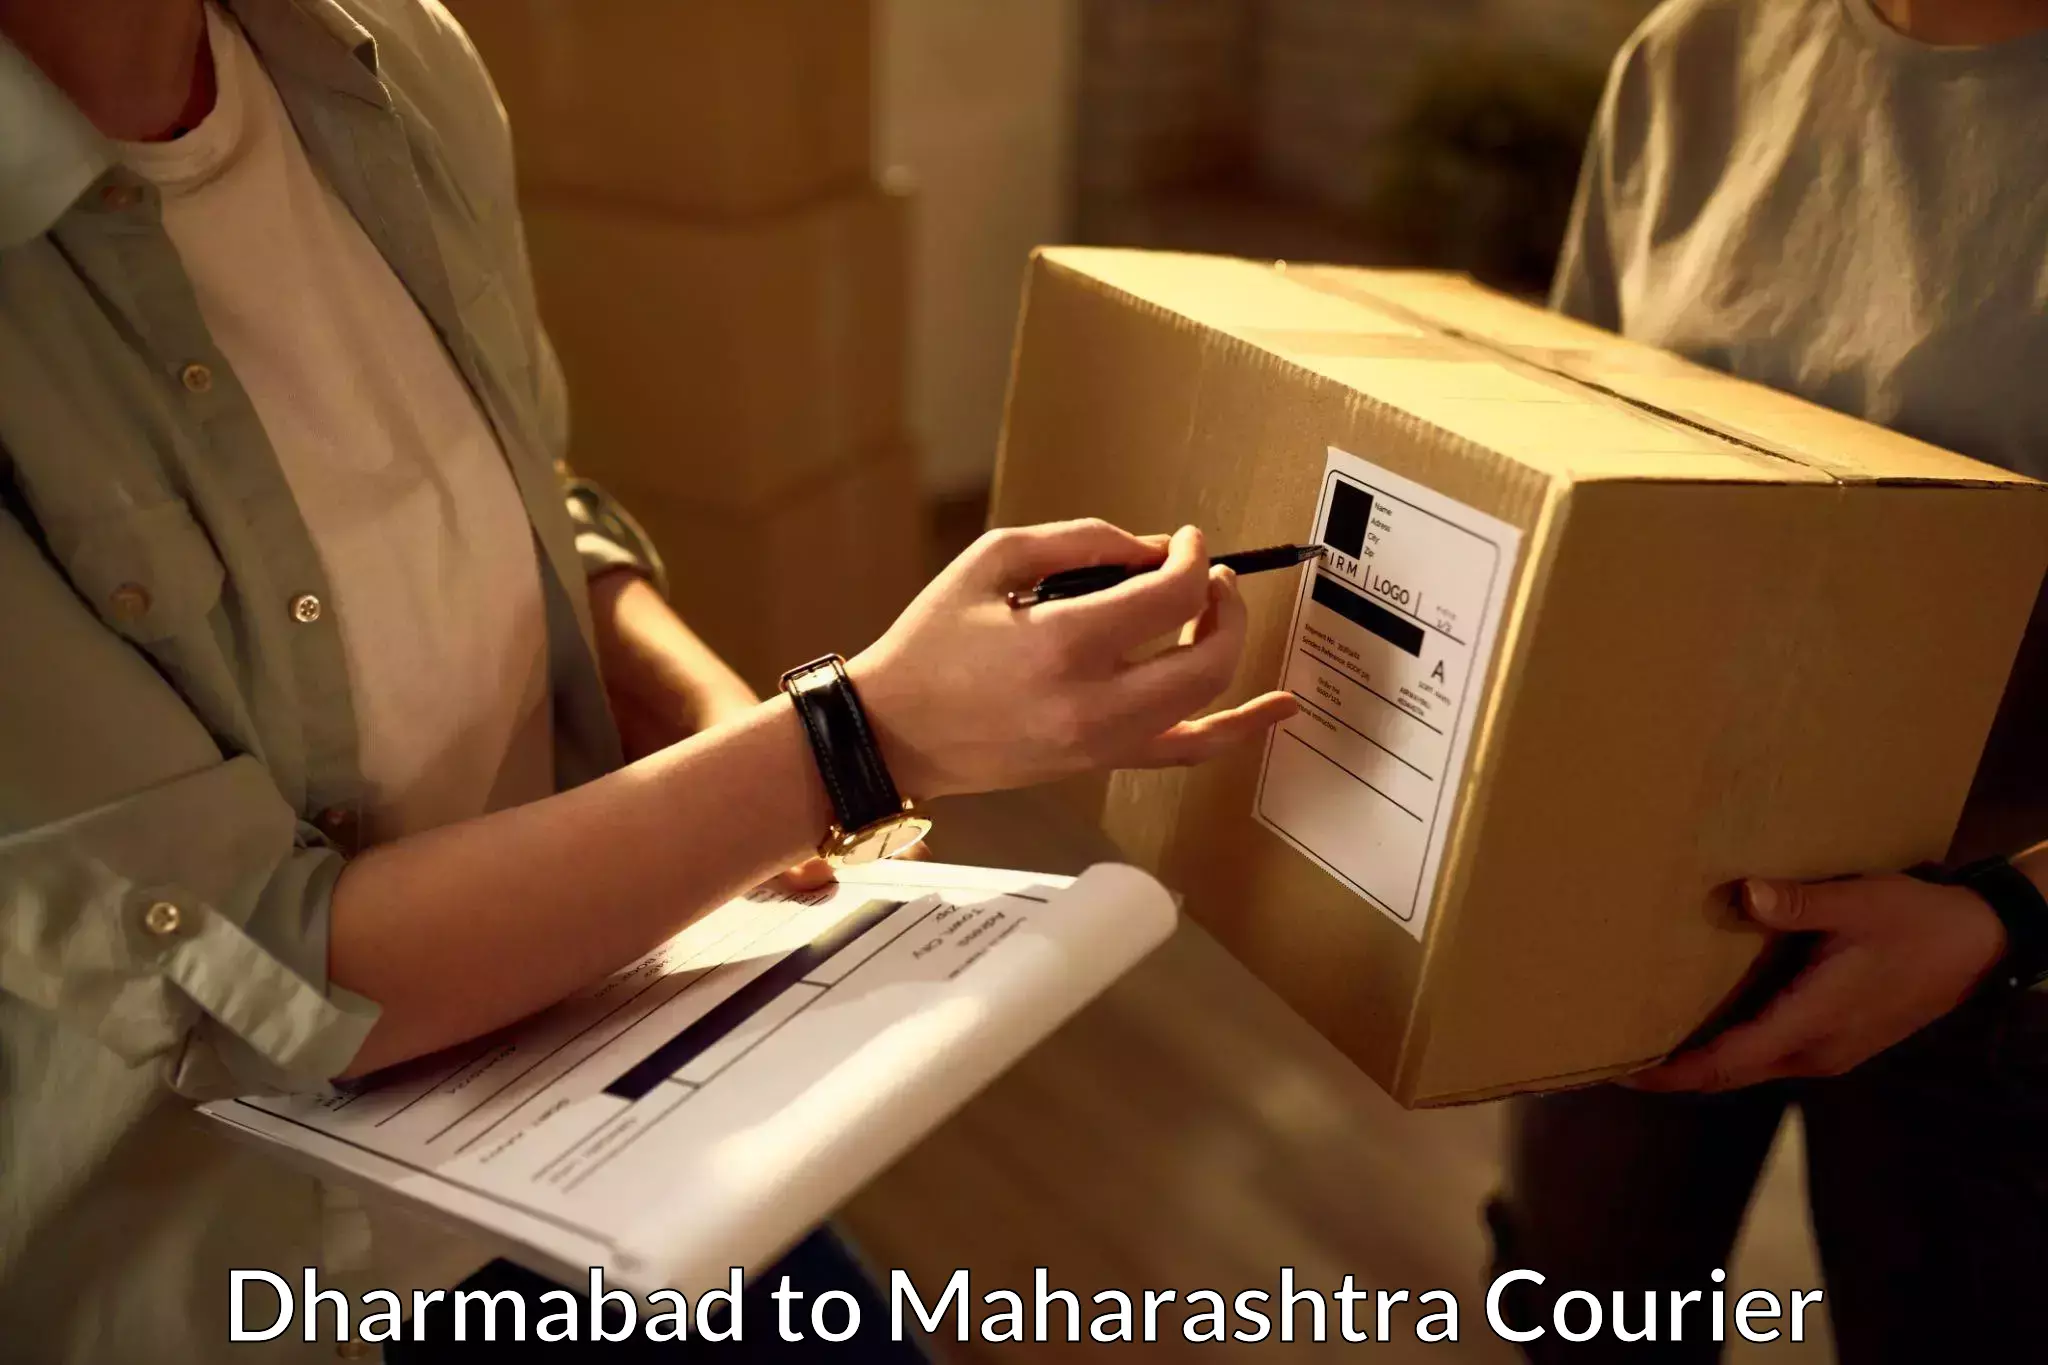 Package delivery network Dharmabad to Mahabaleshwar